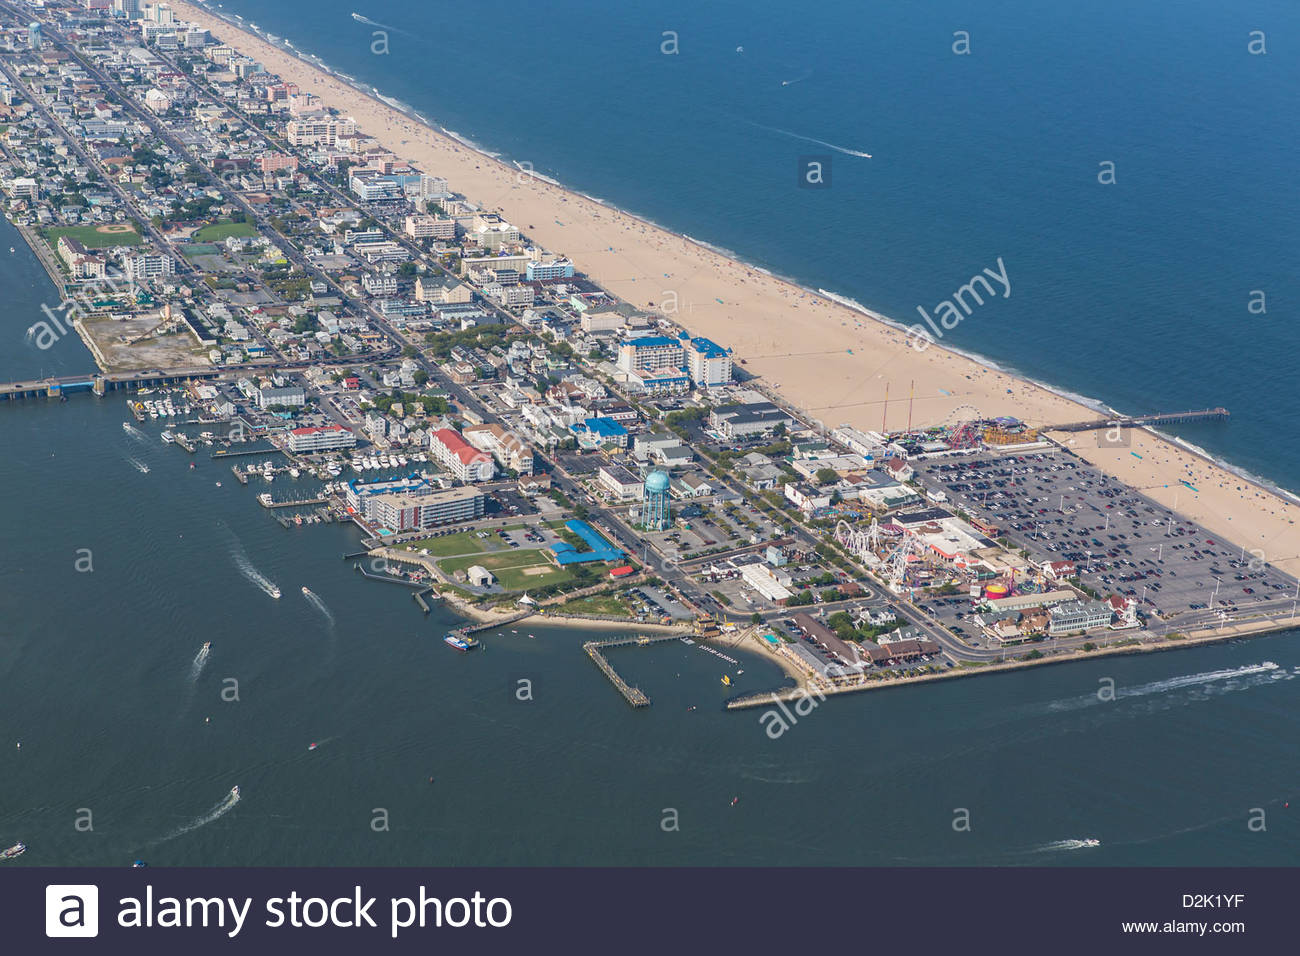 aerial view of ocean city md located on the east coast of maryland D2K1YF